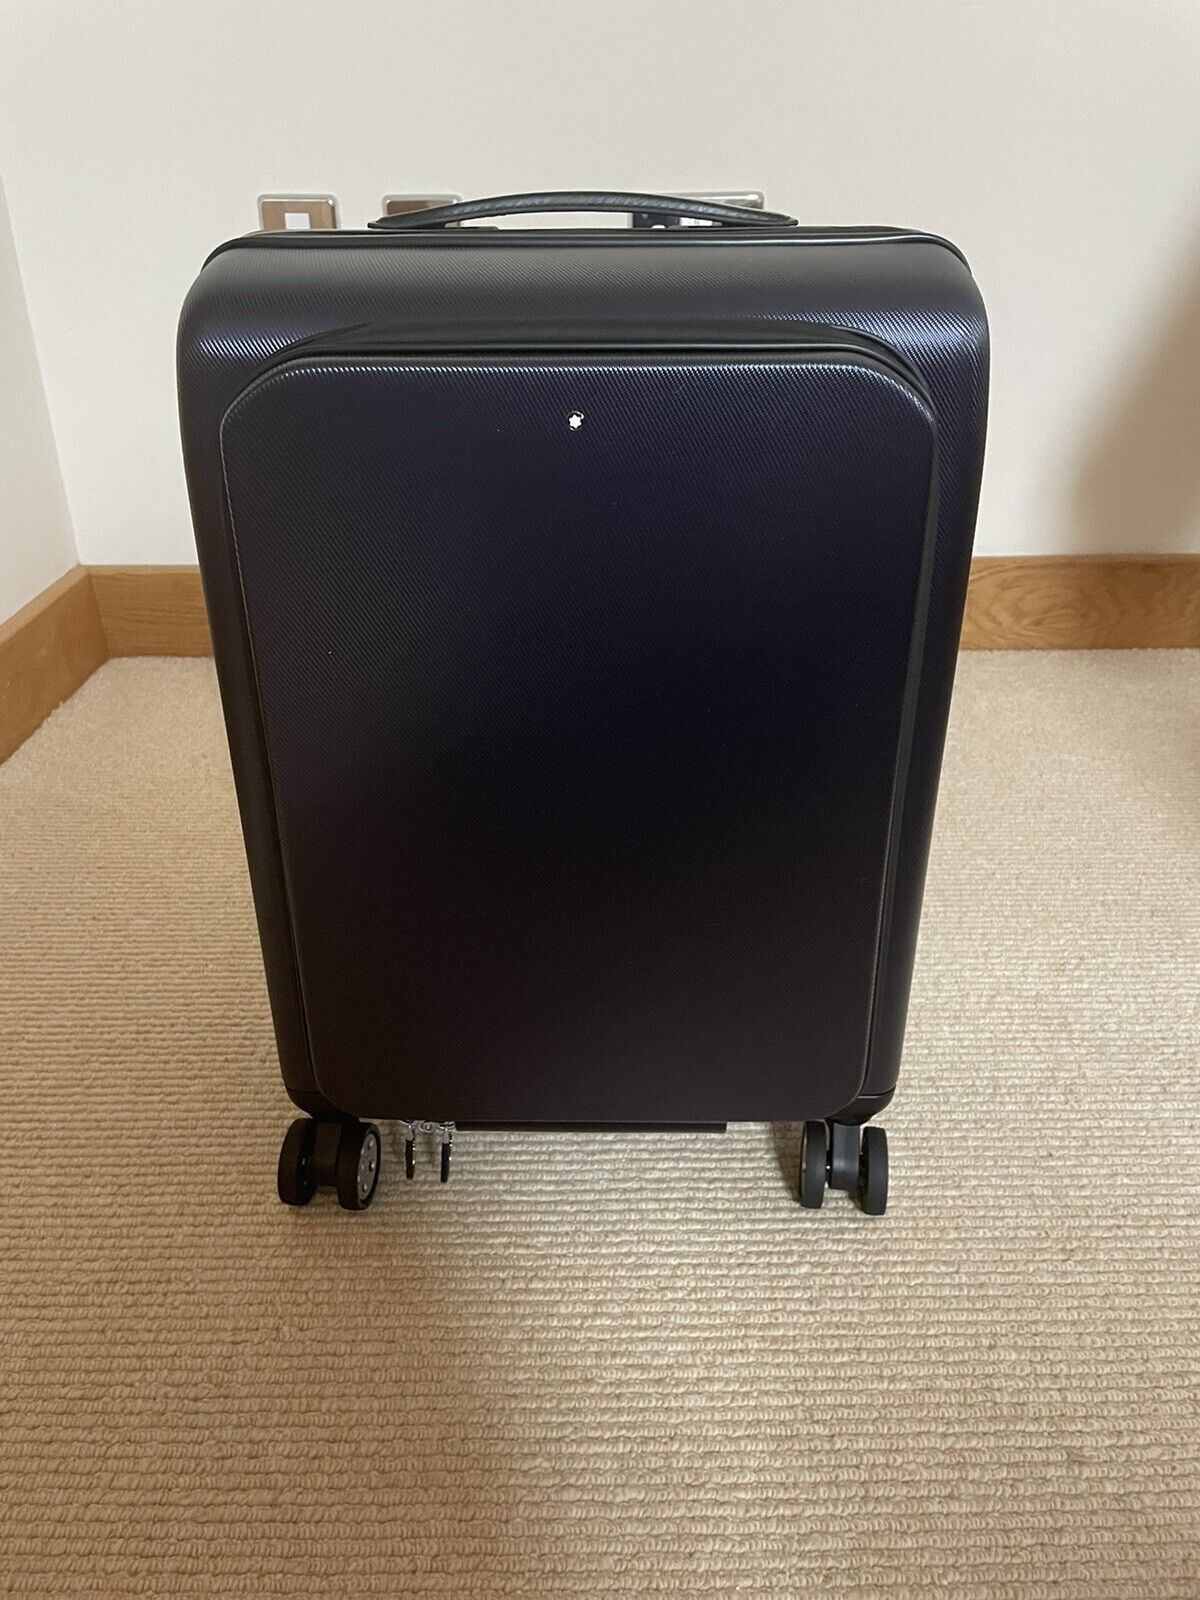 Mont blanc suitcase - Carry-on-Luggage - Brand new